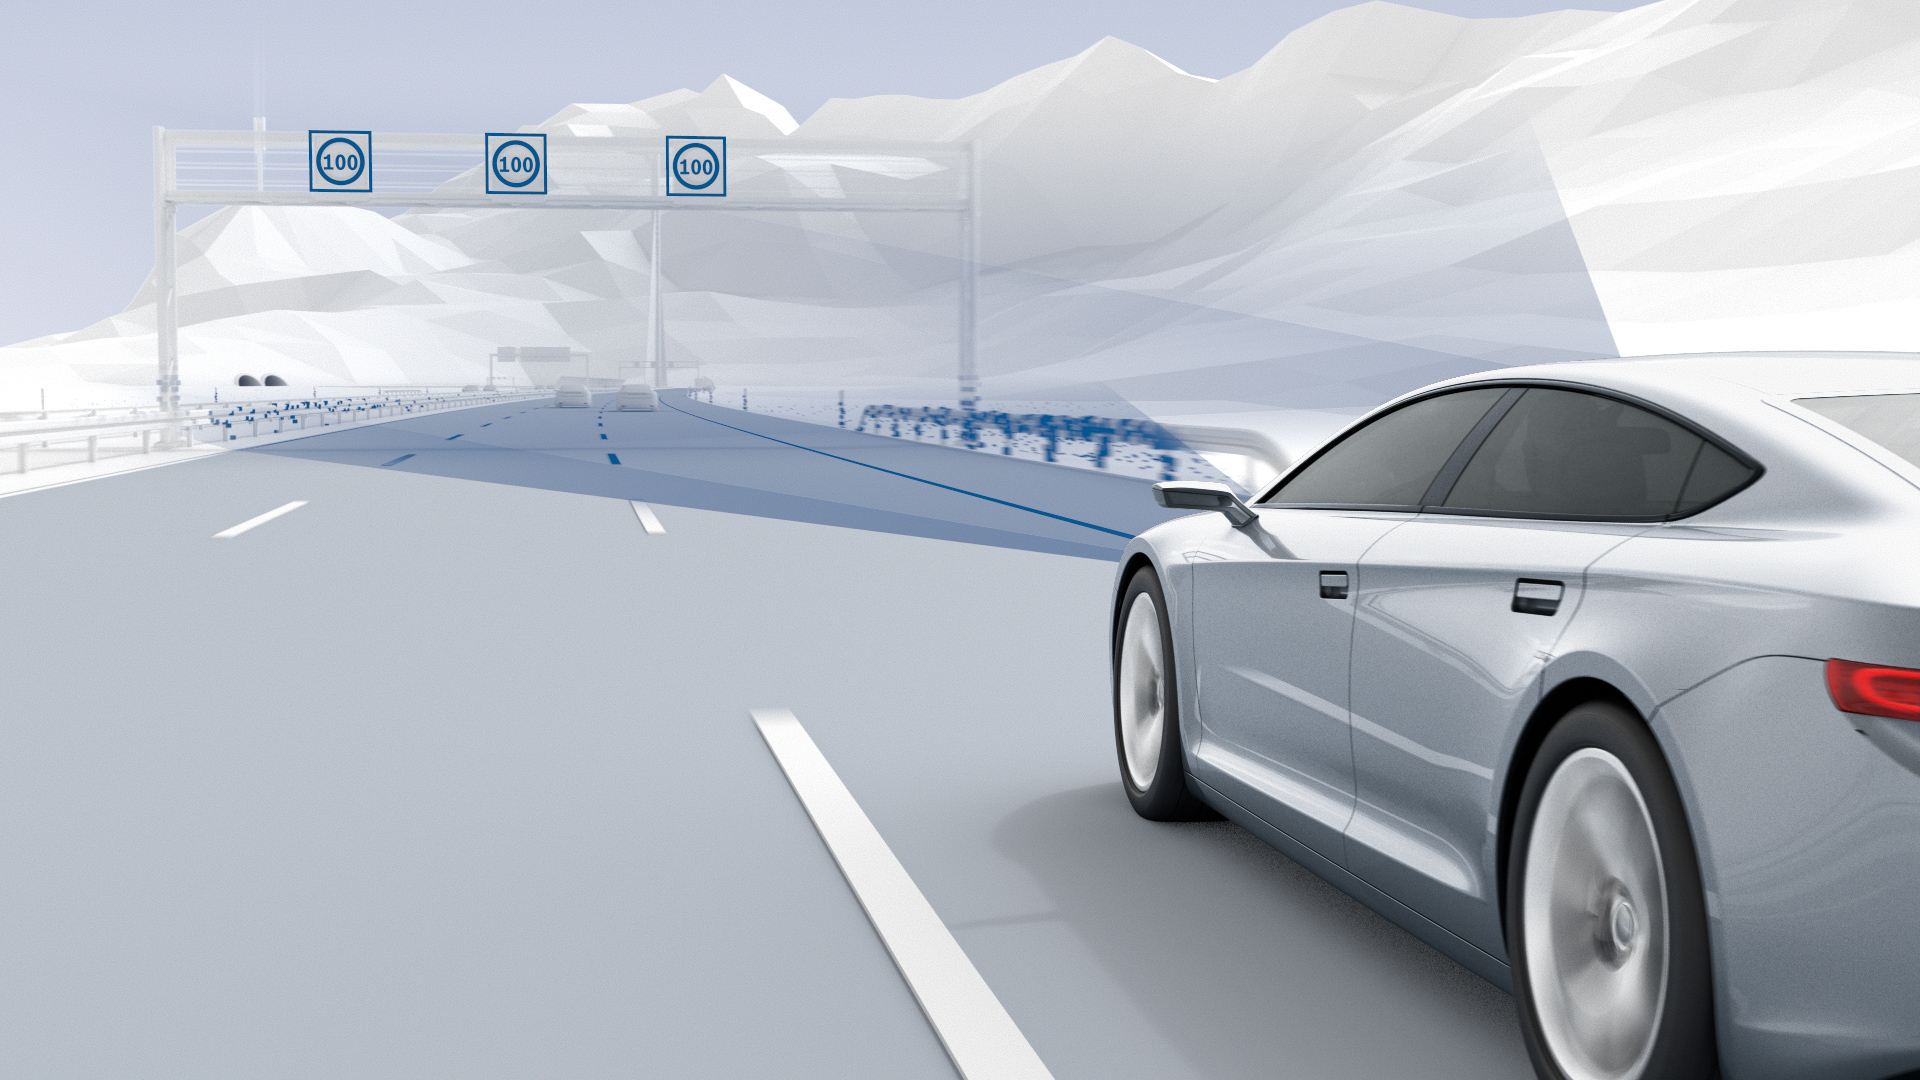 Localization for automated driving